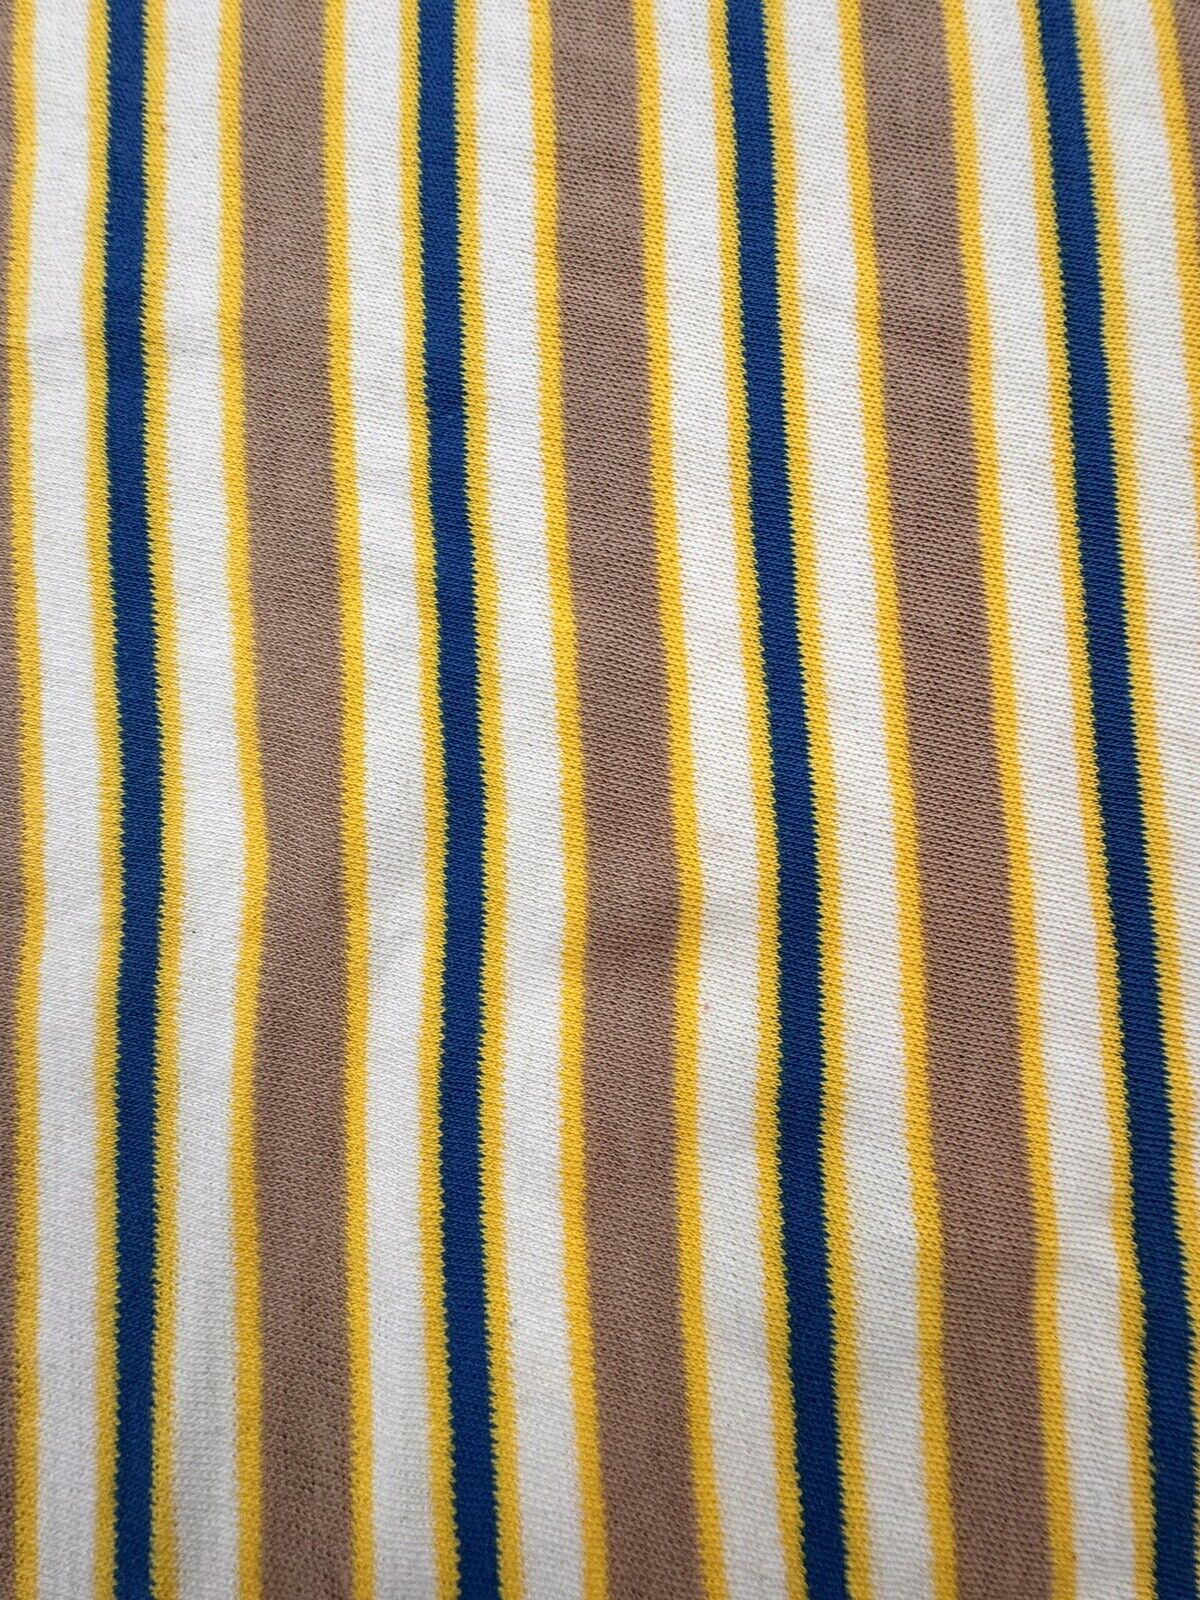 vintage polyester knit striped fabric tan yellow blue midweight 40”x45” 1+ Yard